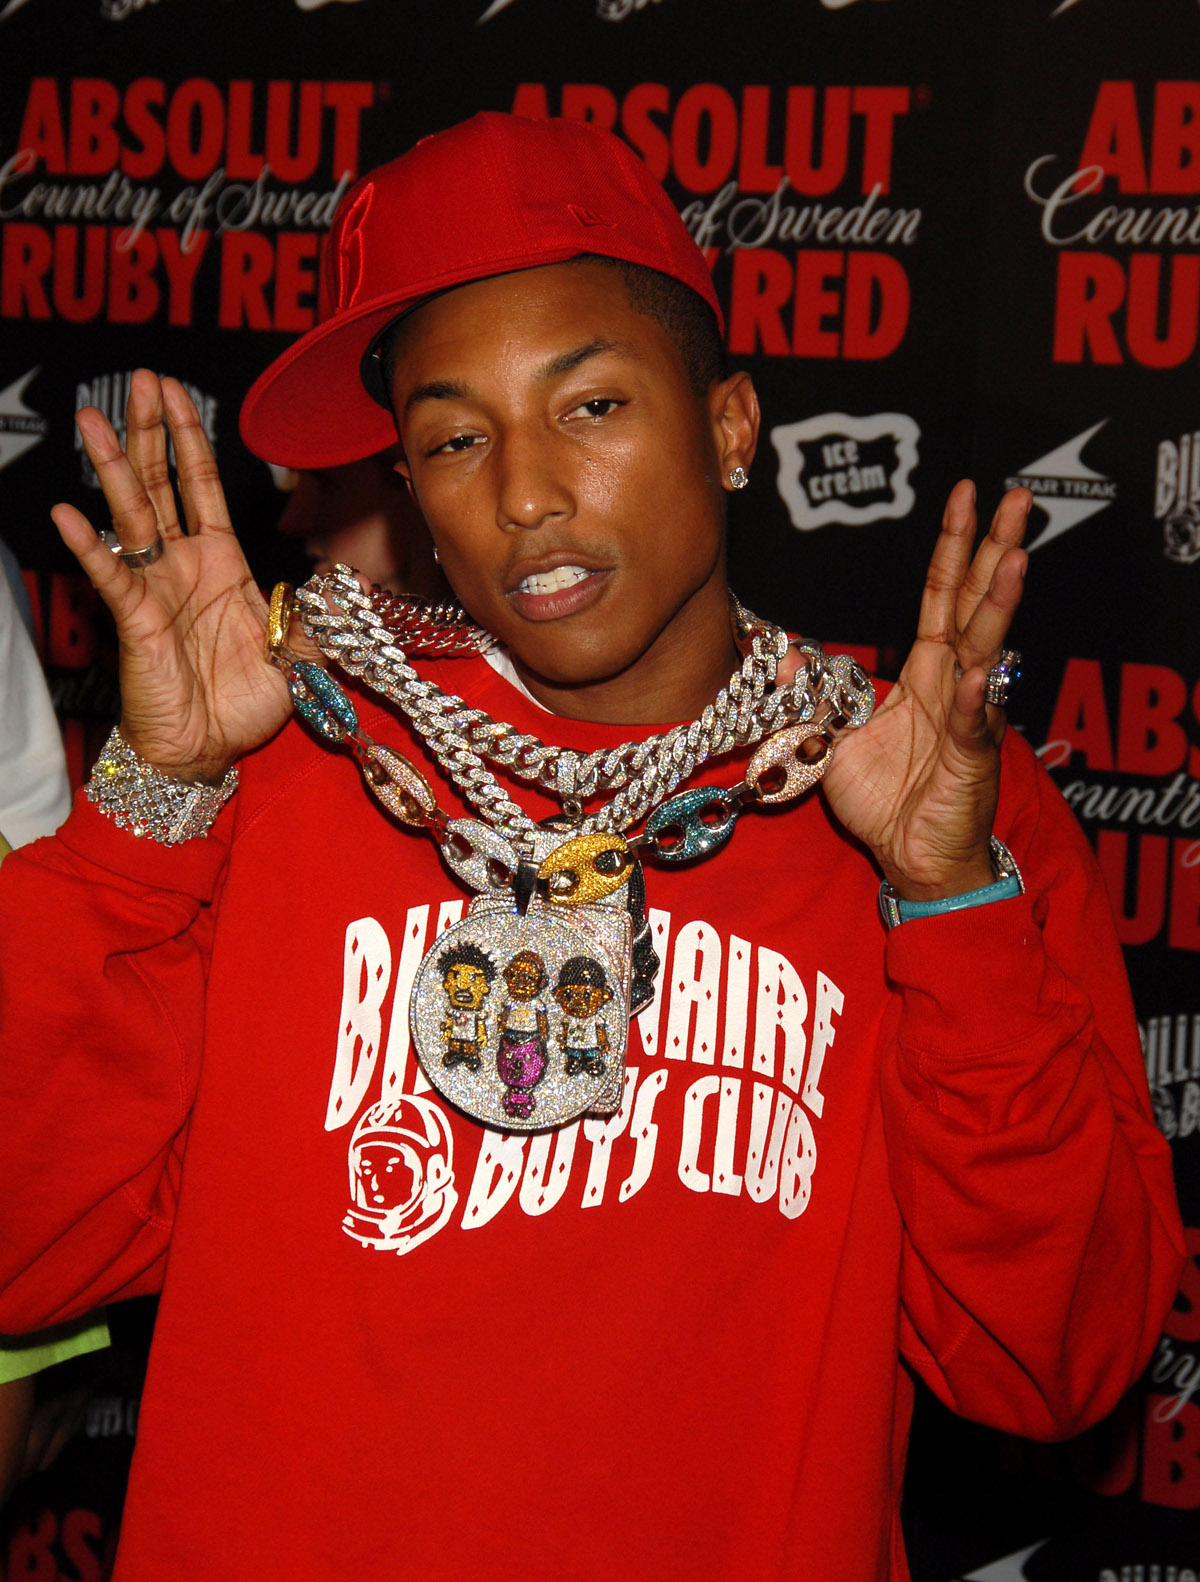 Pharrell Williams at Louis Vuitton Is the Culmination of a